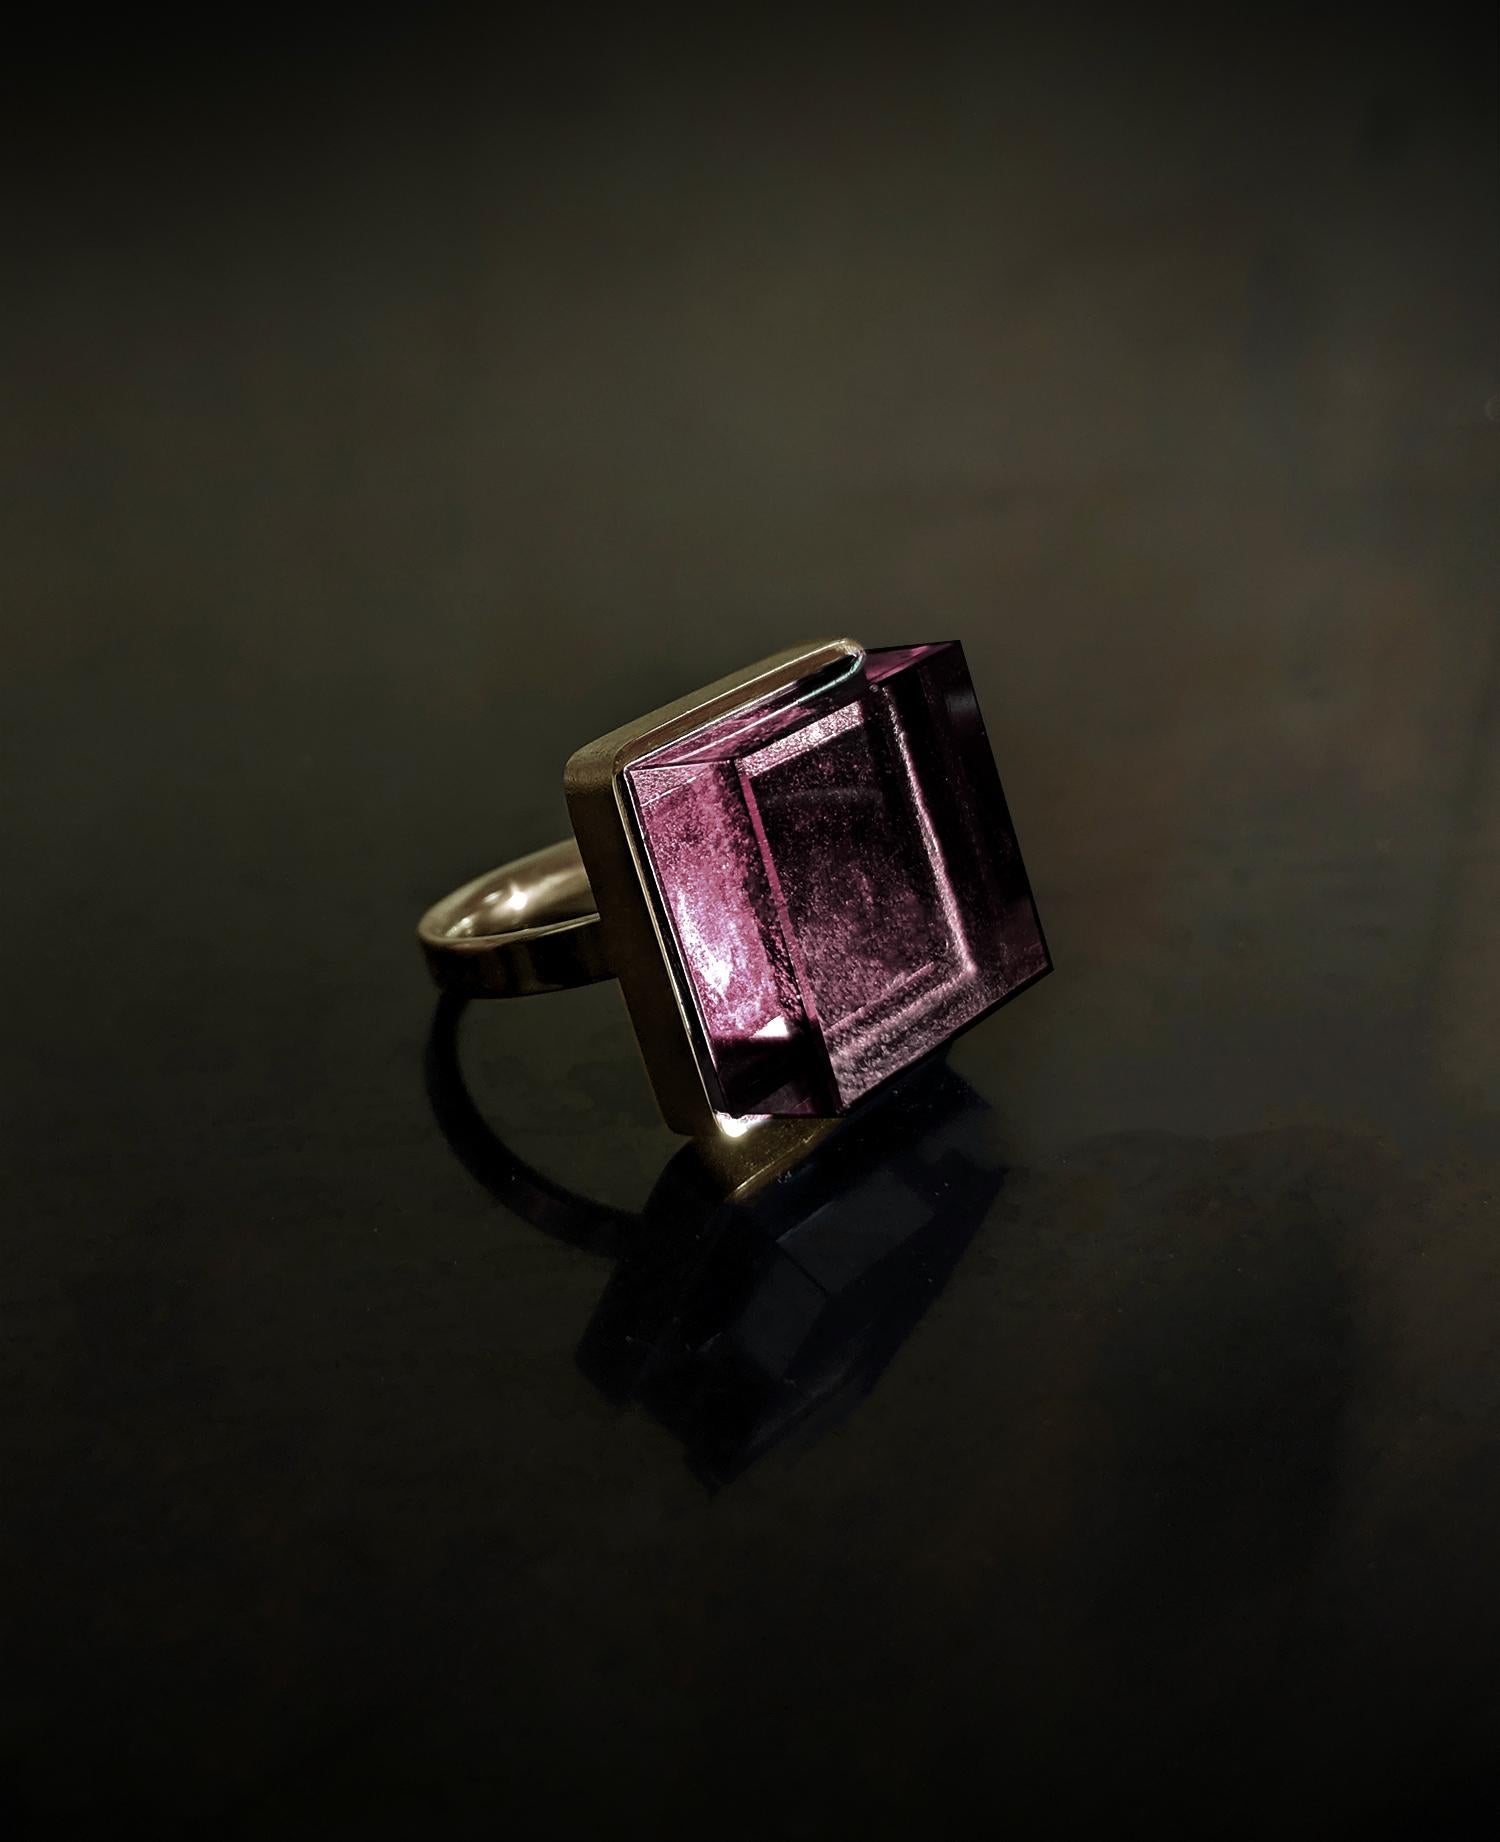 This Art Deco style ring features a 15x15x8 mm natural pink tourmaline set in 18 karat yellow gold. It has been featured in both Harper's Bazaar and Vogue UA.

Its design is inspiring to architects, designers, and artists alike. The ring's size and